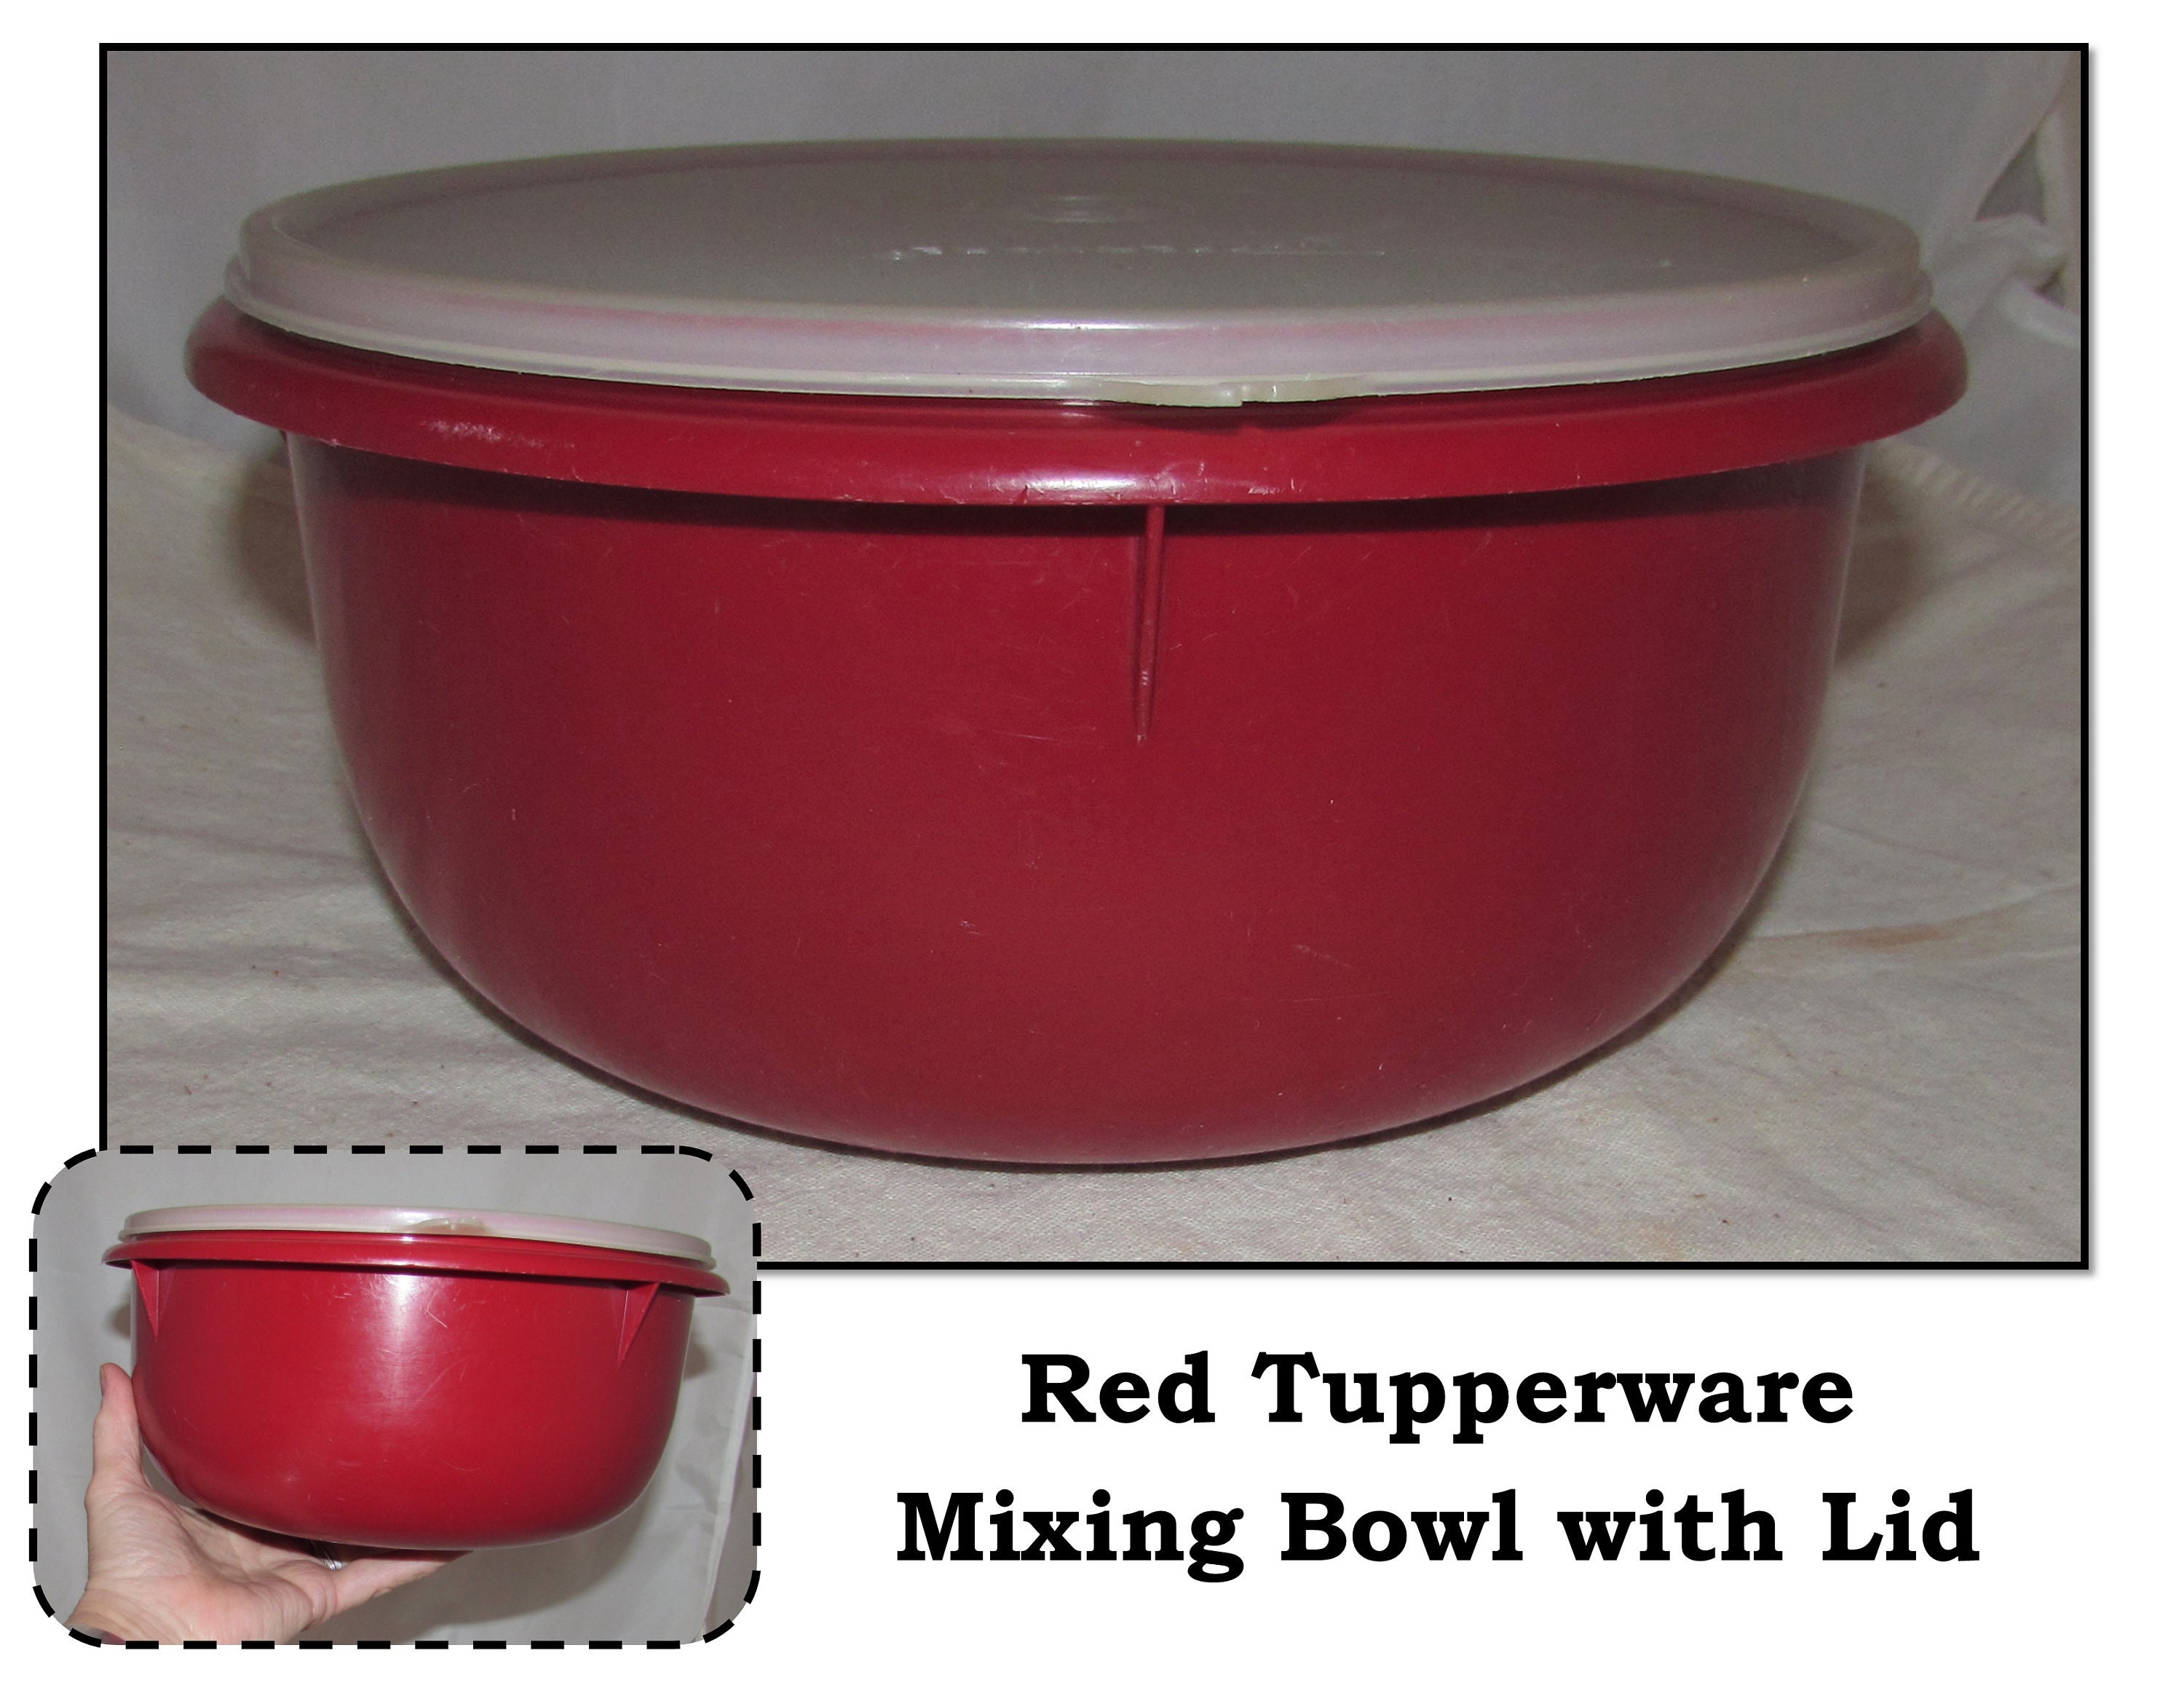 Anchor Hocking Glass Mixing Bowl Set with Red Plastic Lids